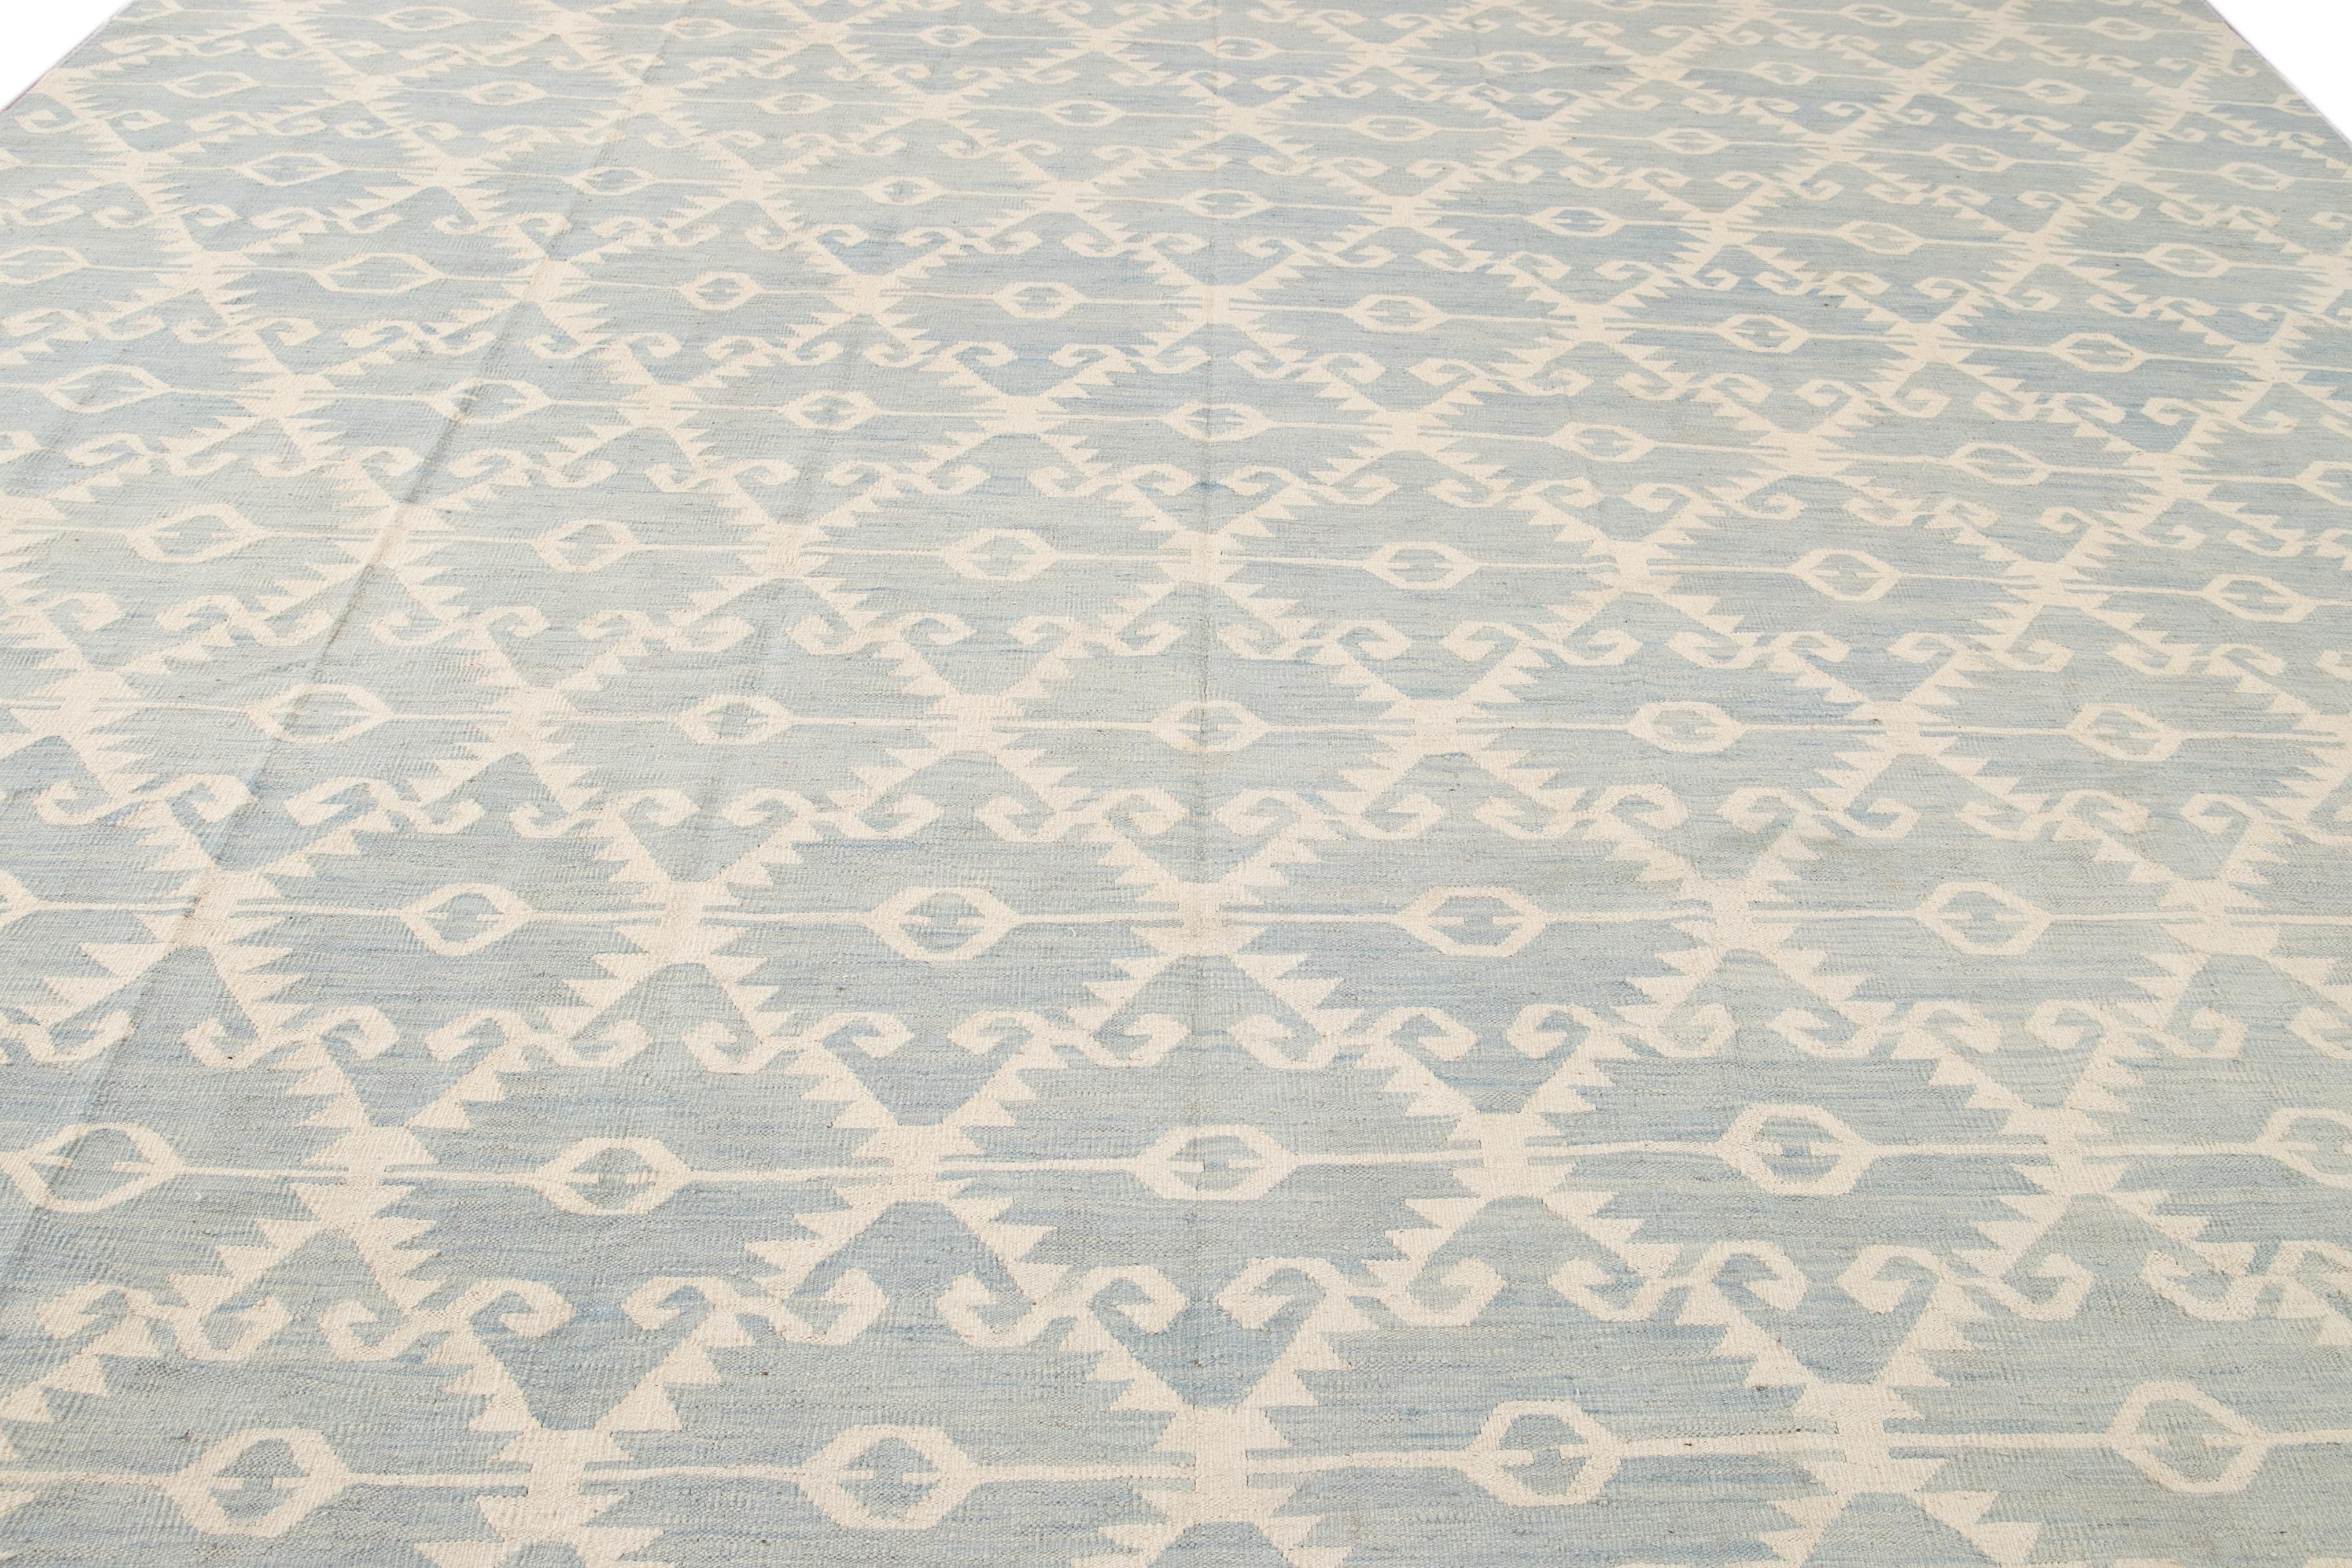 This premium wool Kilim flatweave rug displays a stunning modern beige motif. It features a light blue background with a comprehensive tribal pattern.

This rug measures 12'6